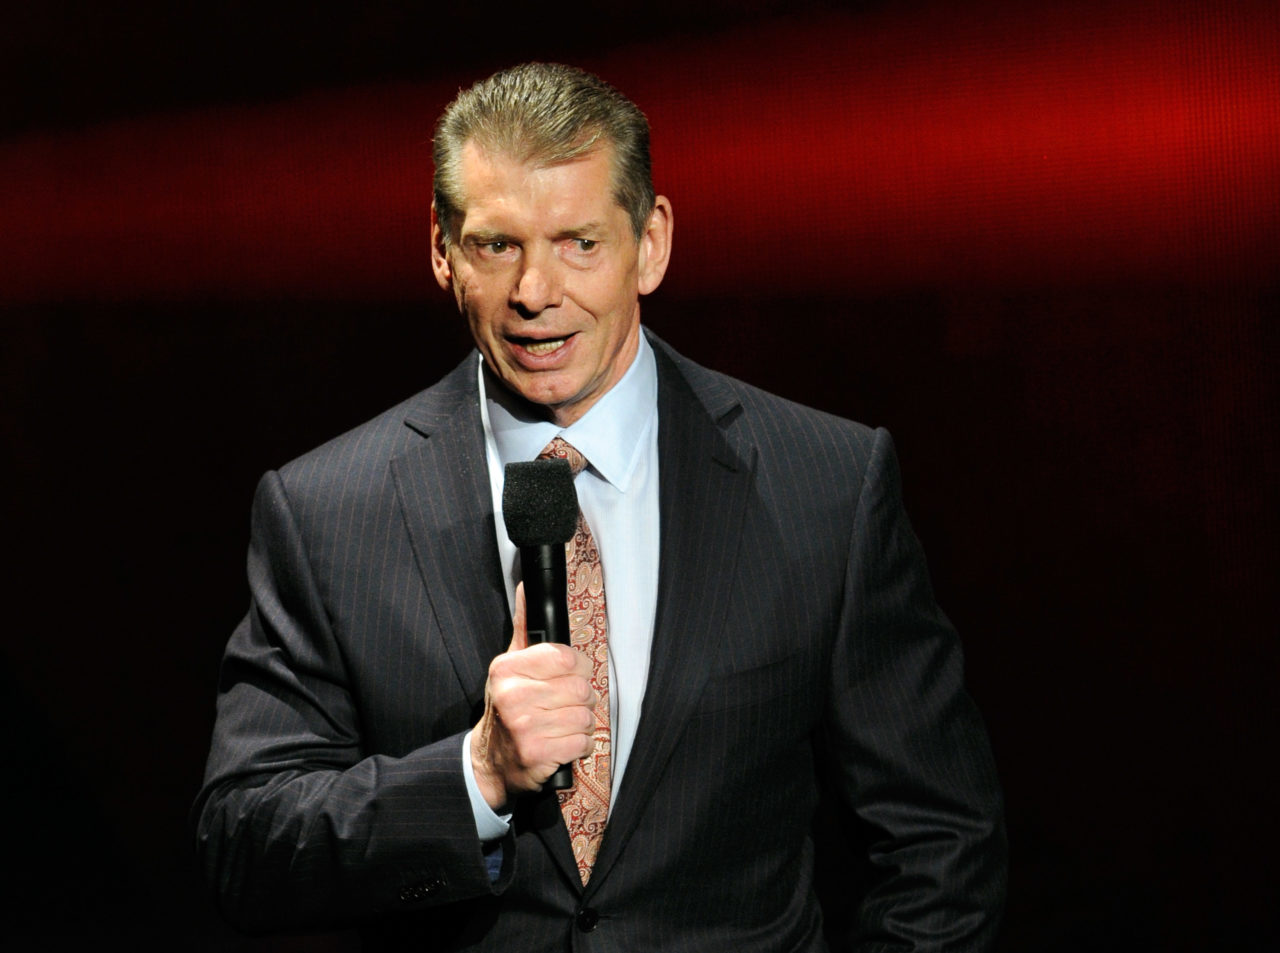 Vince McMahon speaks at a news conference announcing the WWE Network at the 2014 International CES at the Encore Theater at Wynn Las Vegas on January 8, 2014 in Las Vegas, Nevada. The network will launch on February 24, 2014 as the first-ever 24/7 streaming network, offering both scheduled programs and video on demand. The USD 9.99 per month subscription will include access to all 12 live WWE pay-per-view events each year. CES, the world's largest annual consumer technology trade show, runs through January 10 and is expected to feature 3,200 exhibitors showing off their latest products and services to about 150,000 attendees.